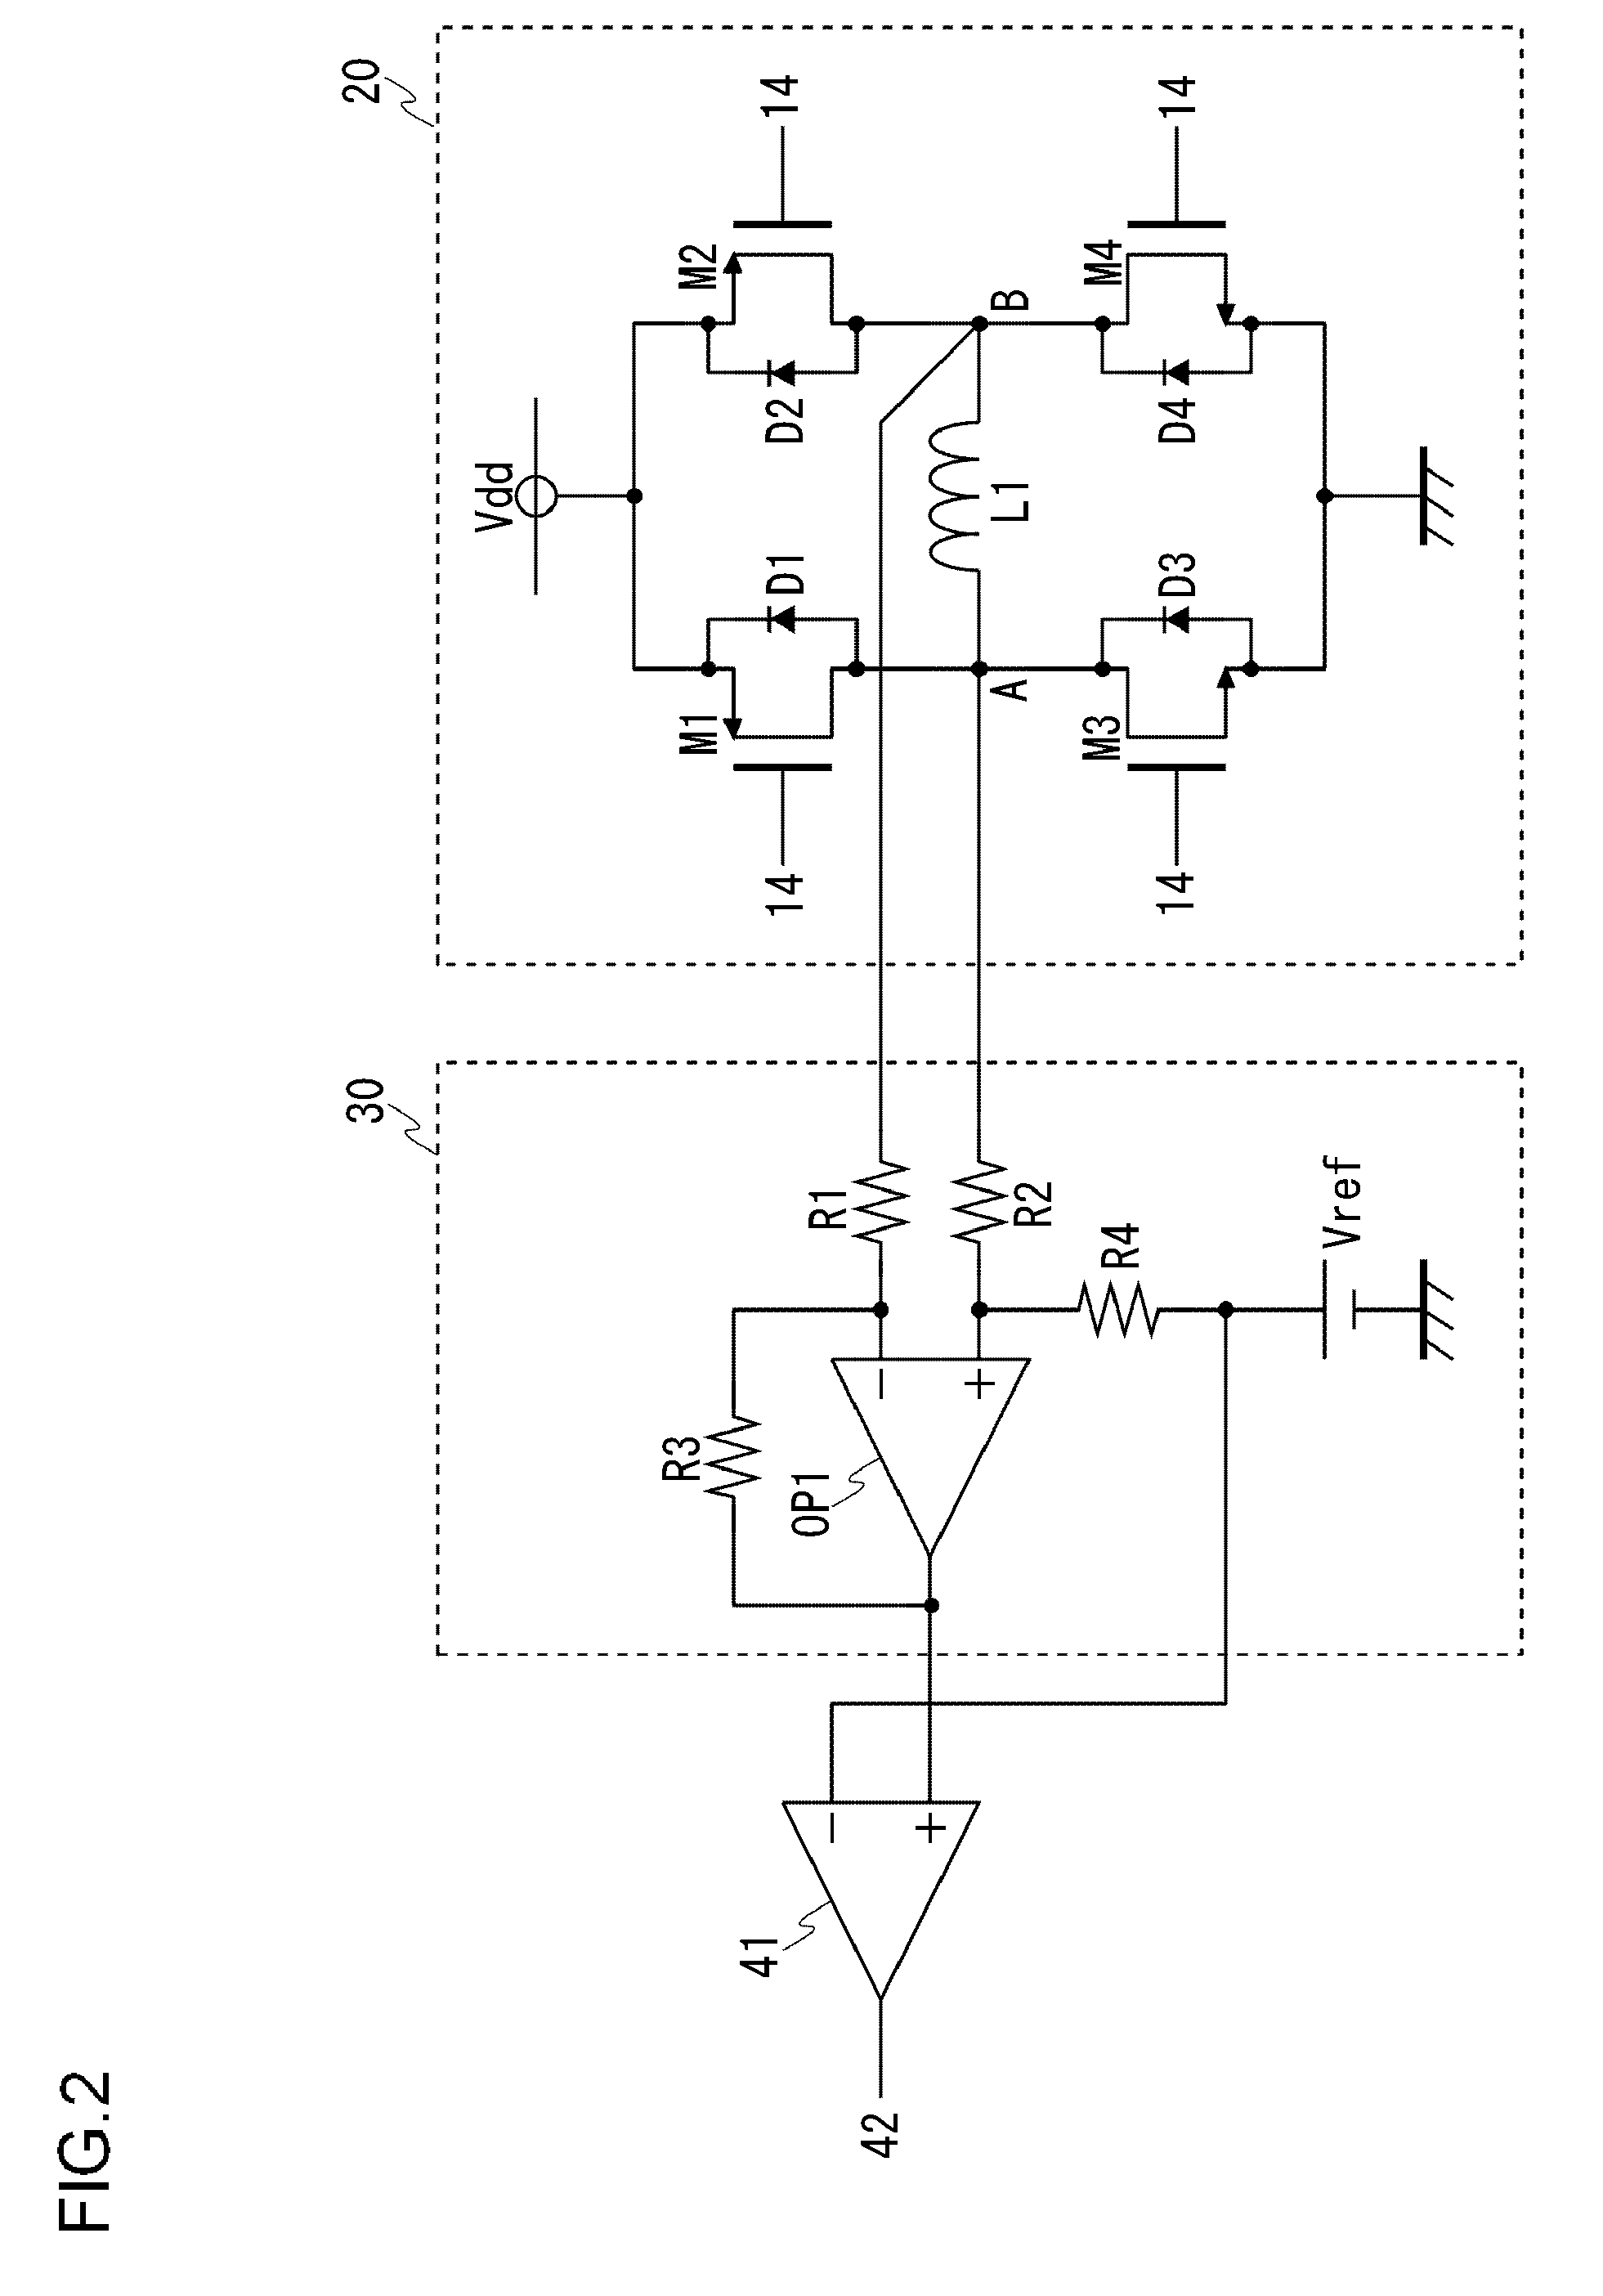 Drive control circuit for linear vibration motor